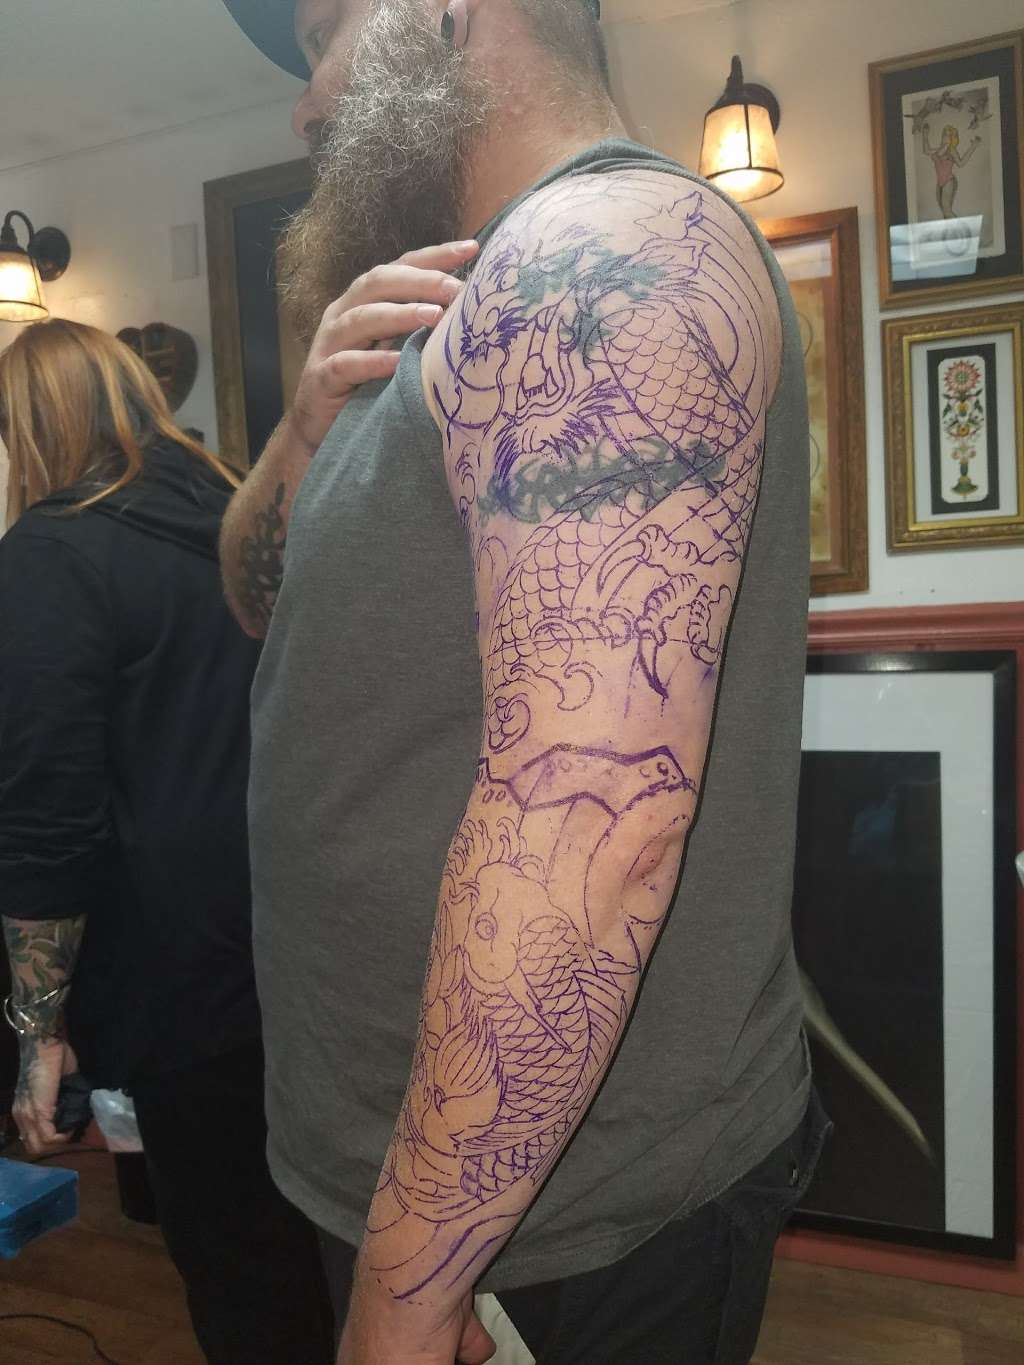 American Tattoo Studio | 1434 Souder Rd # A, Knoxville, MD 21758 | Phone: (301) 834-8335